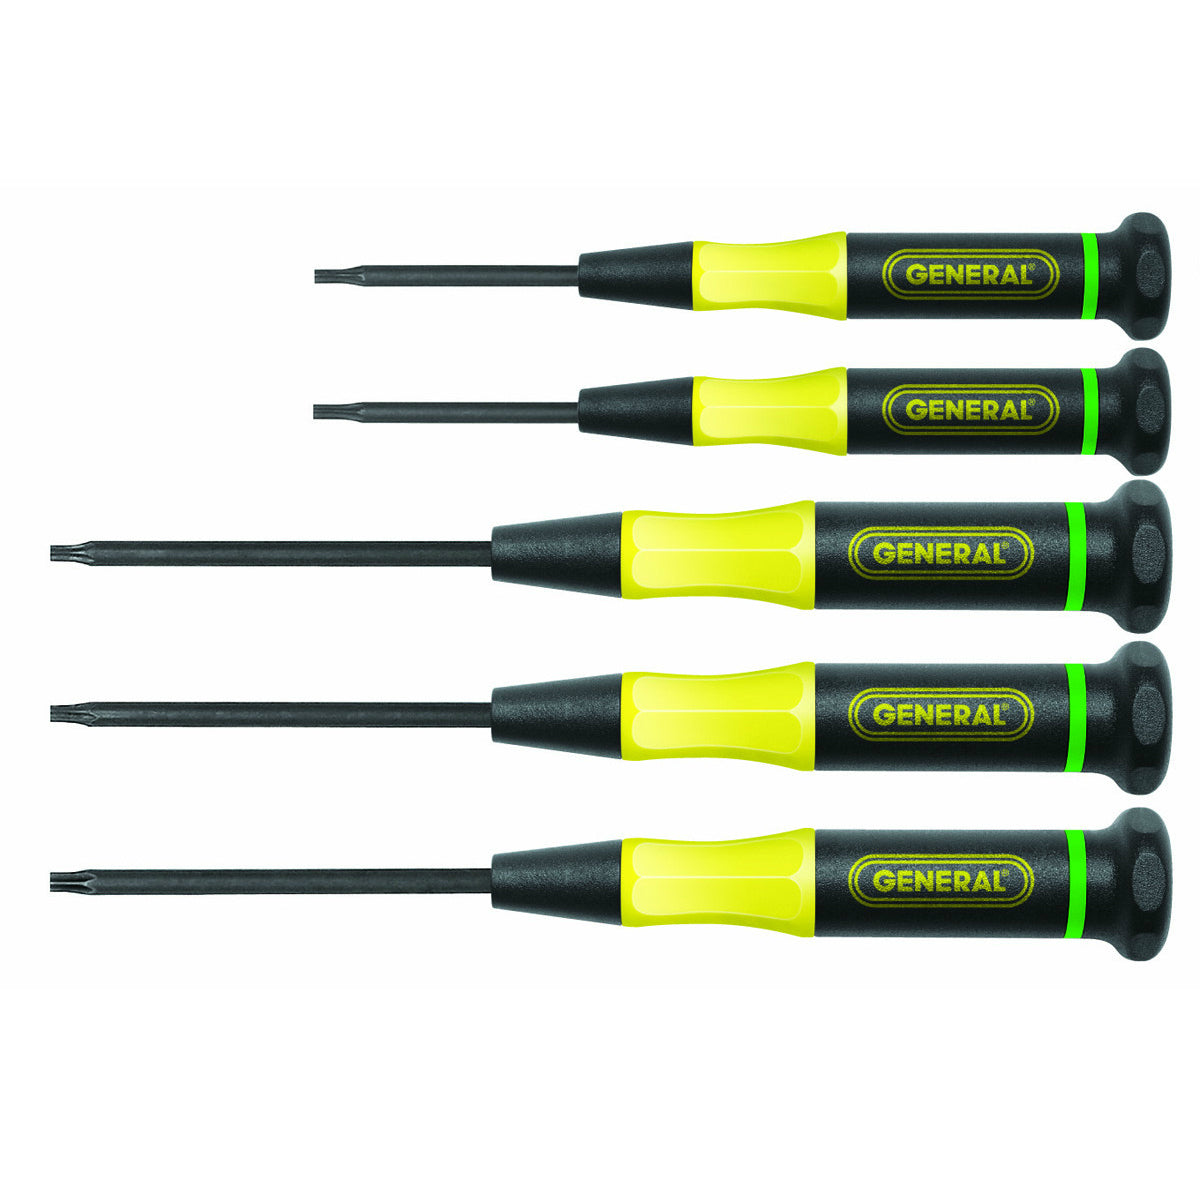 General Tools 711 Precision Torx Screwdriver Set with Cushioned Grip, 5-Piece